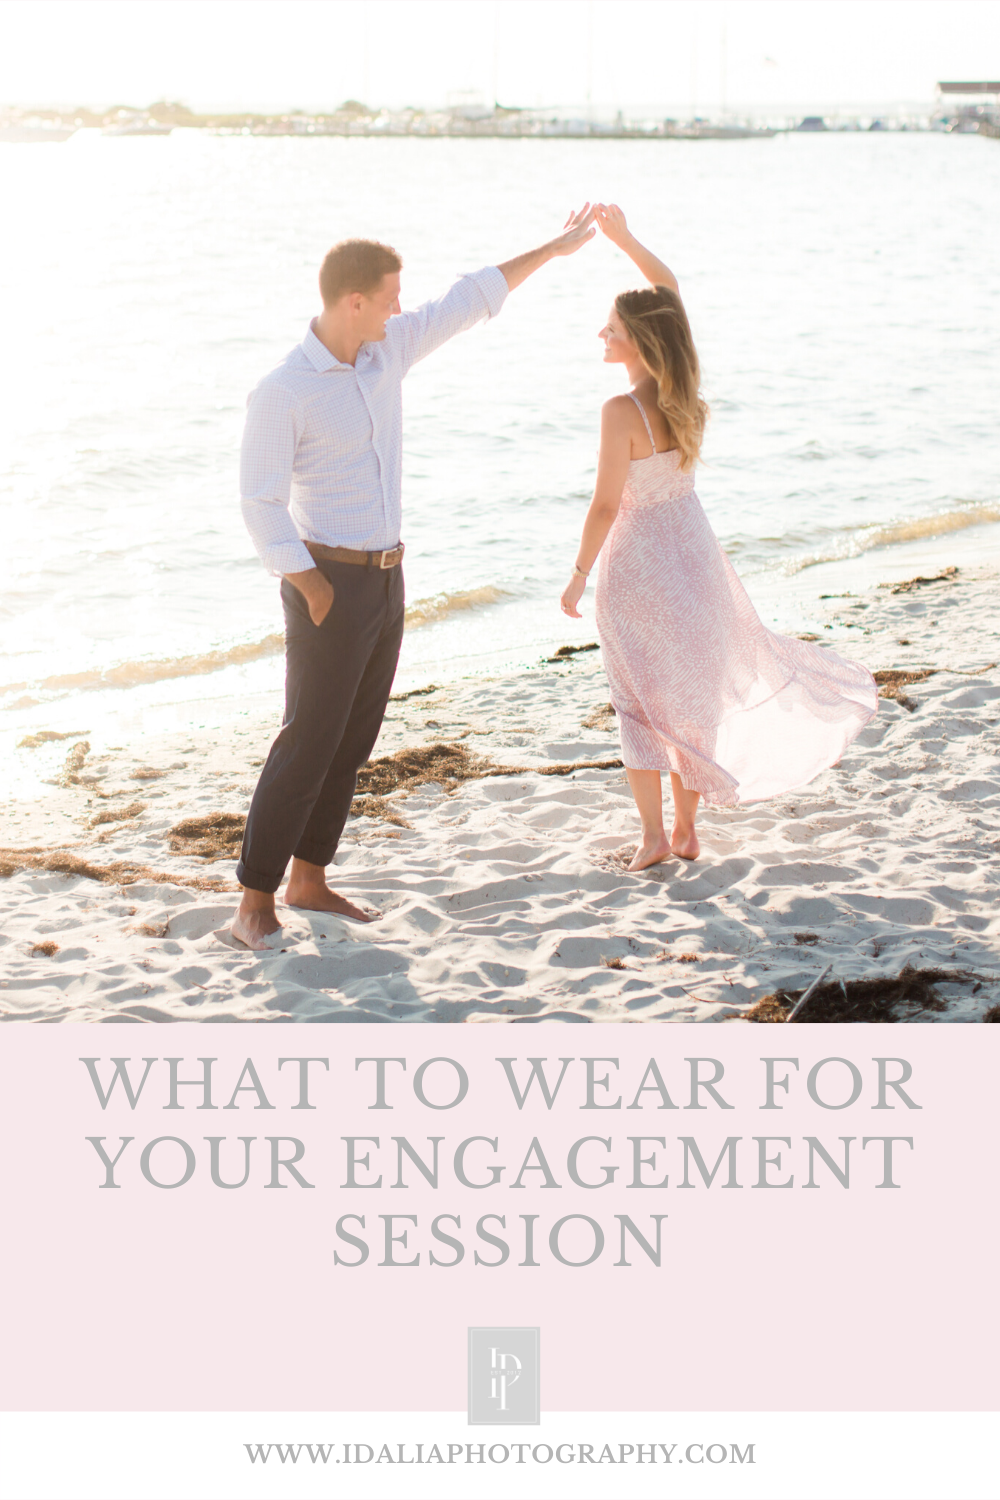 What to Wear for Your Engagement Photos by Idalia Photography